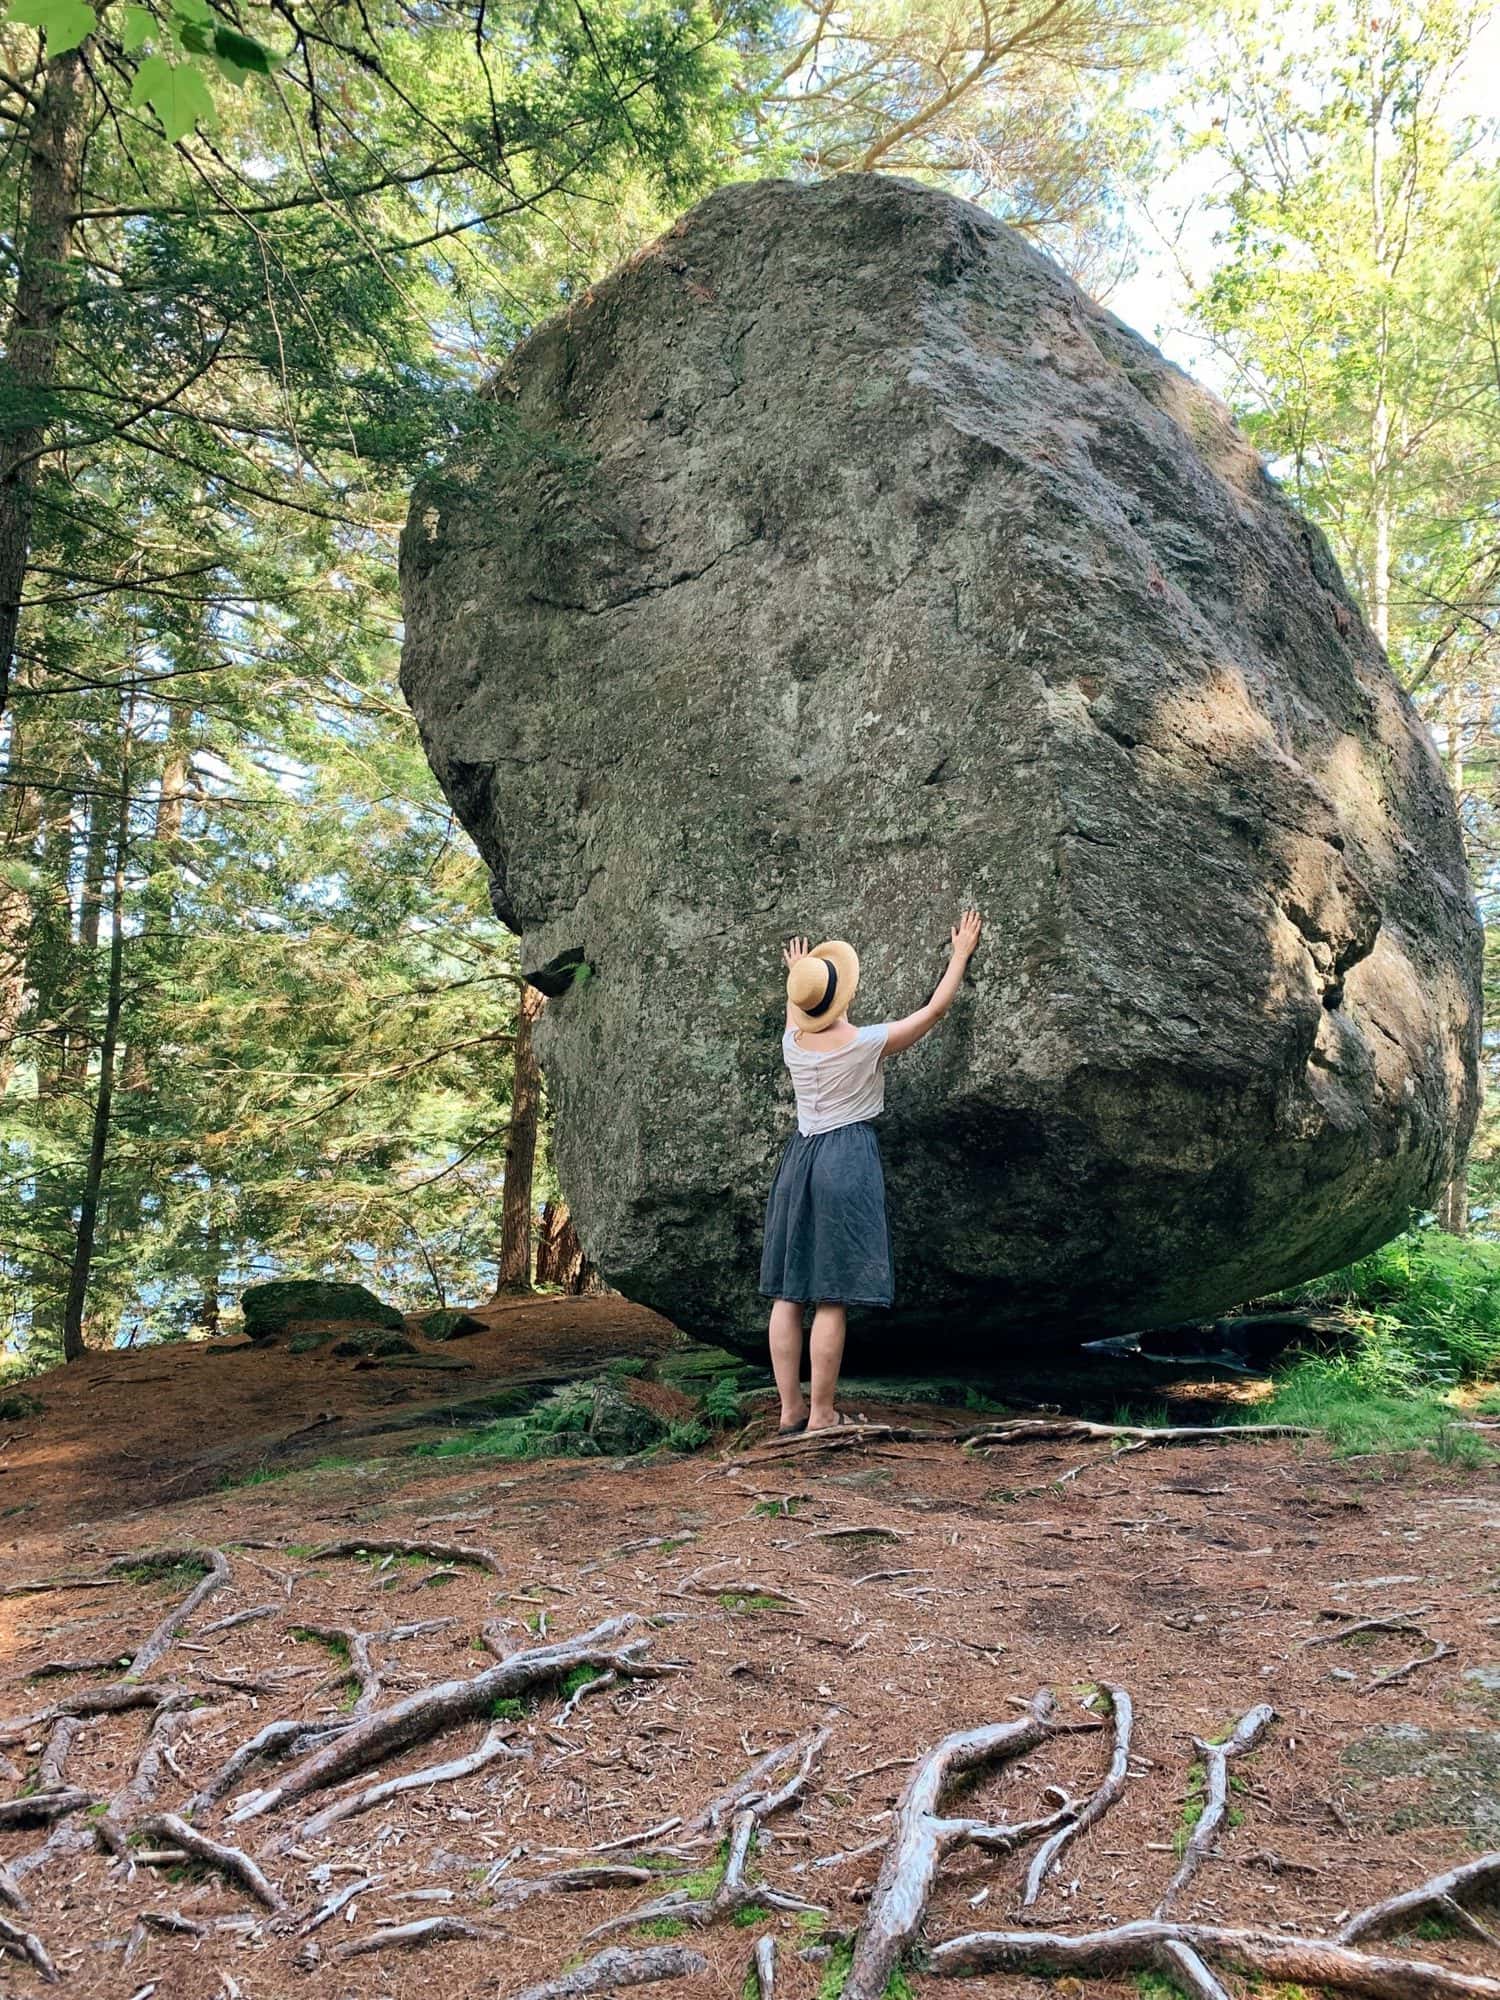 Woman touching a giant rock balanced in a forest